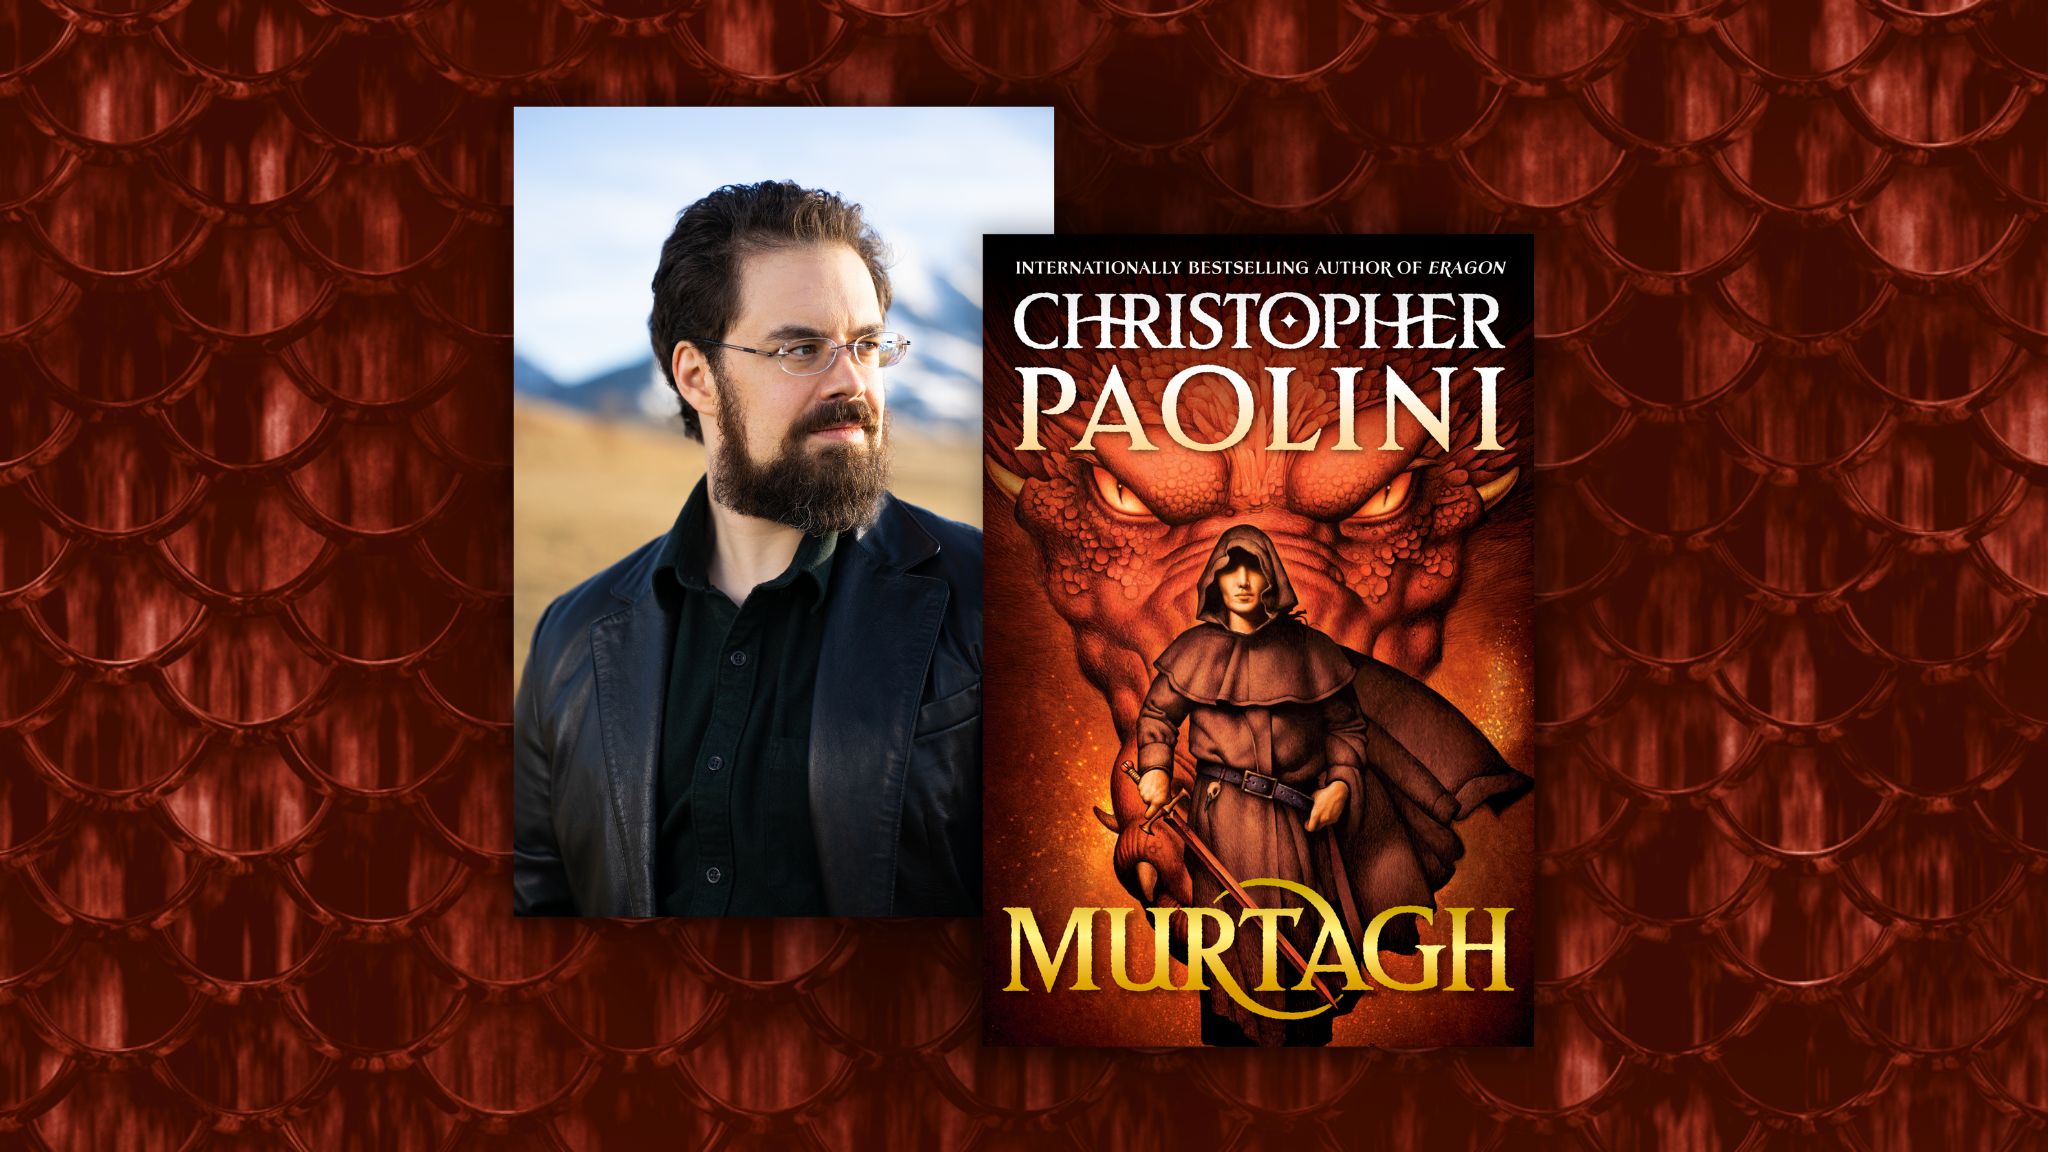 Christopher Paolini Reflects on Success, Writing and Returning to the World  of Eragon in “Murtagh”